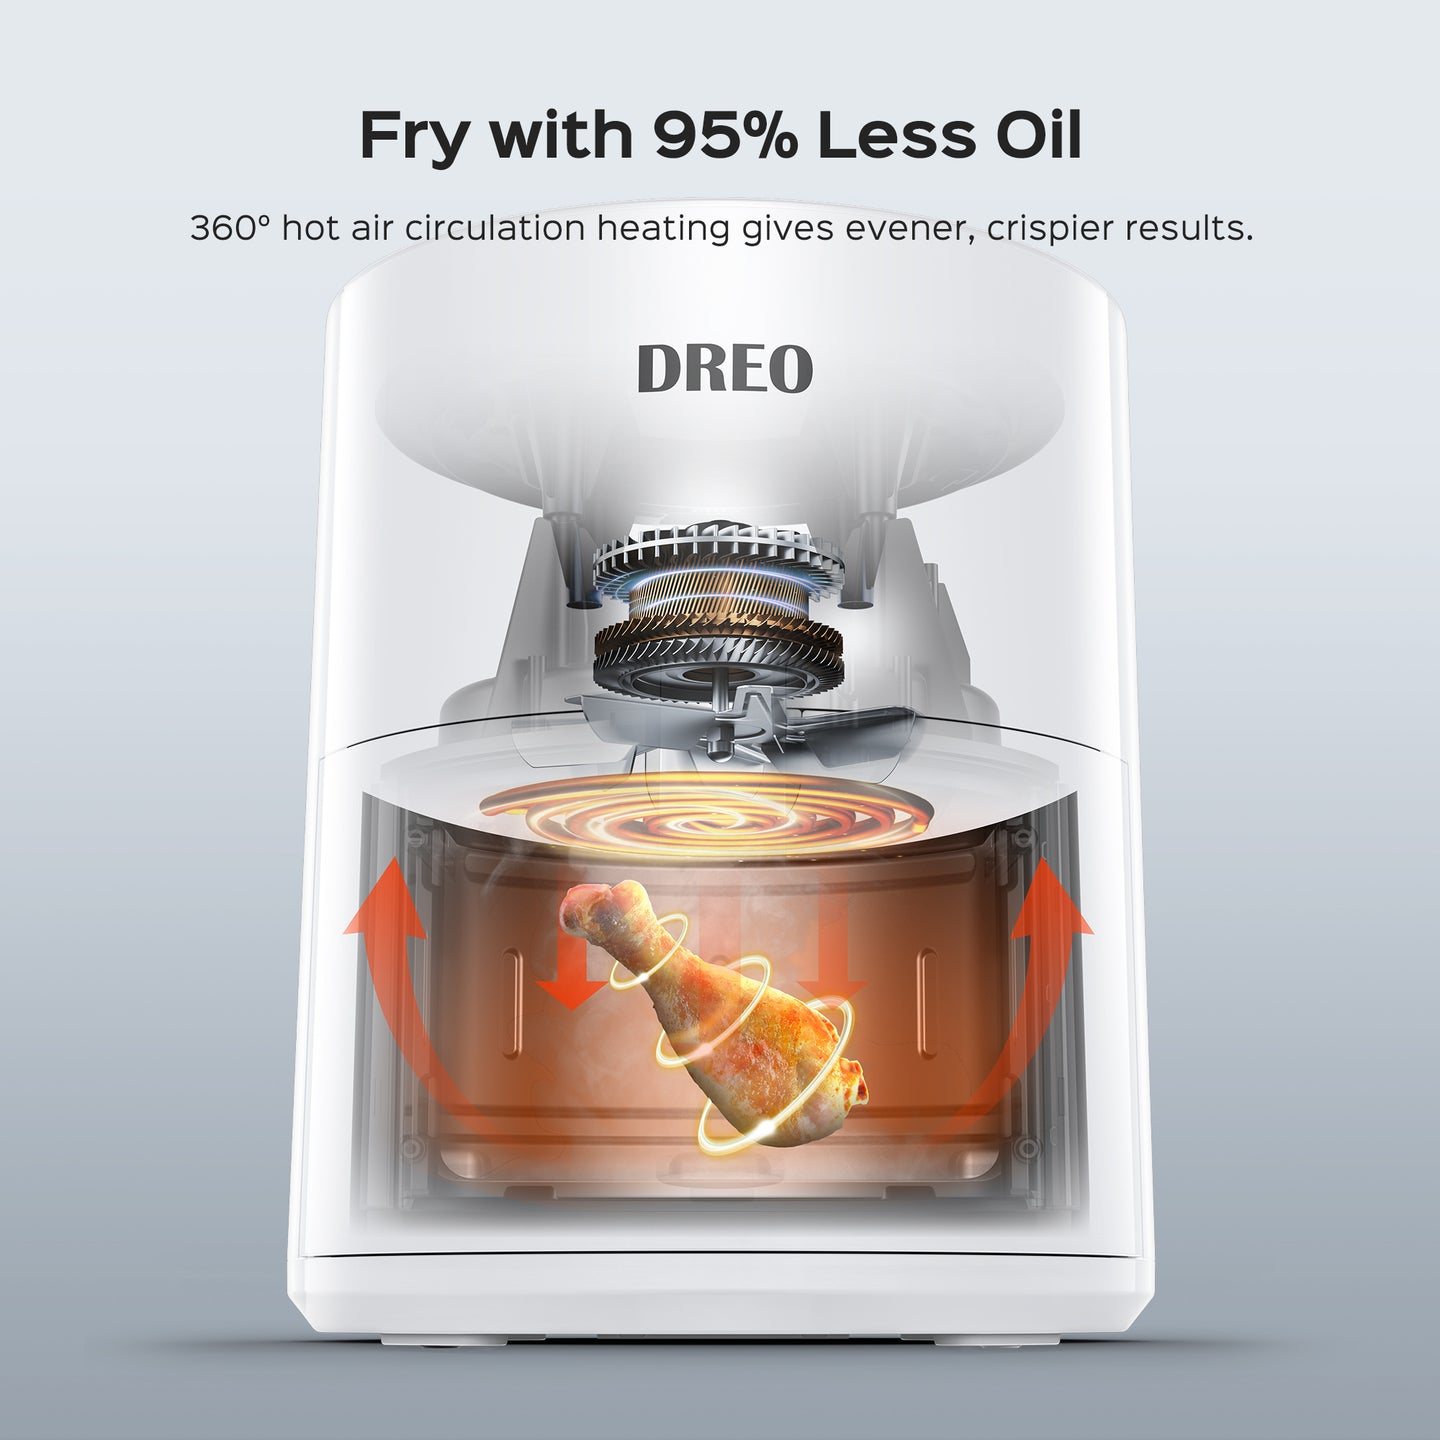 Dreo Air Fryer Pro Max, 11-in-1 Digital Air Fryer Oven Cooker with 100 Recipes